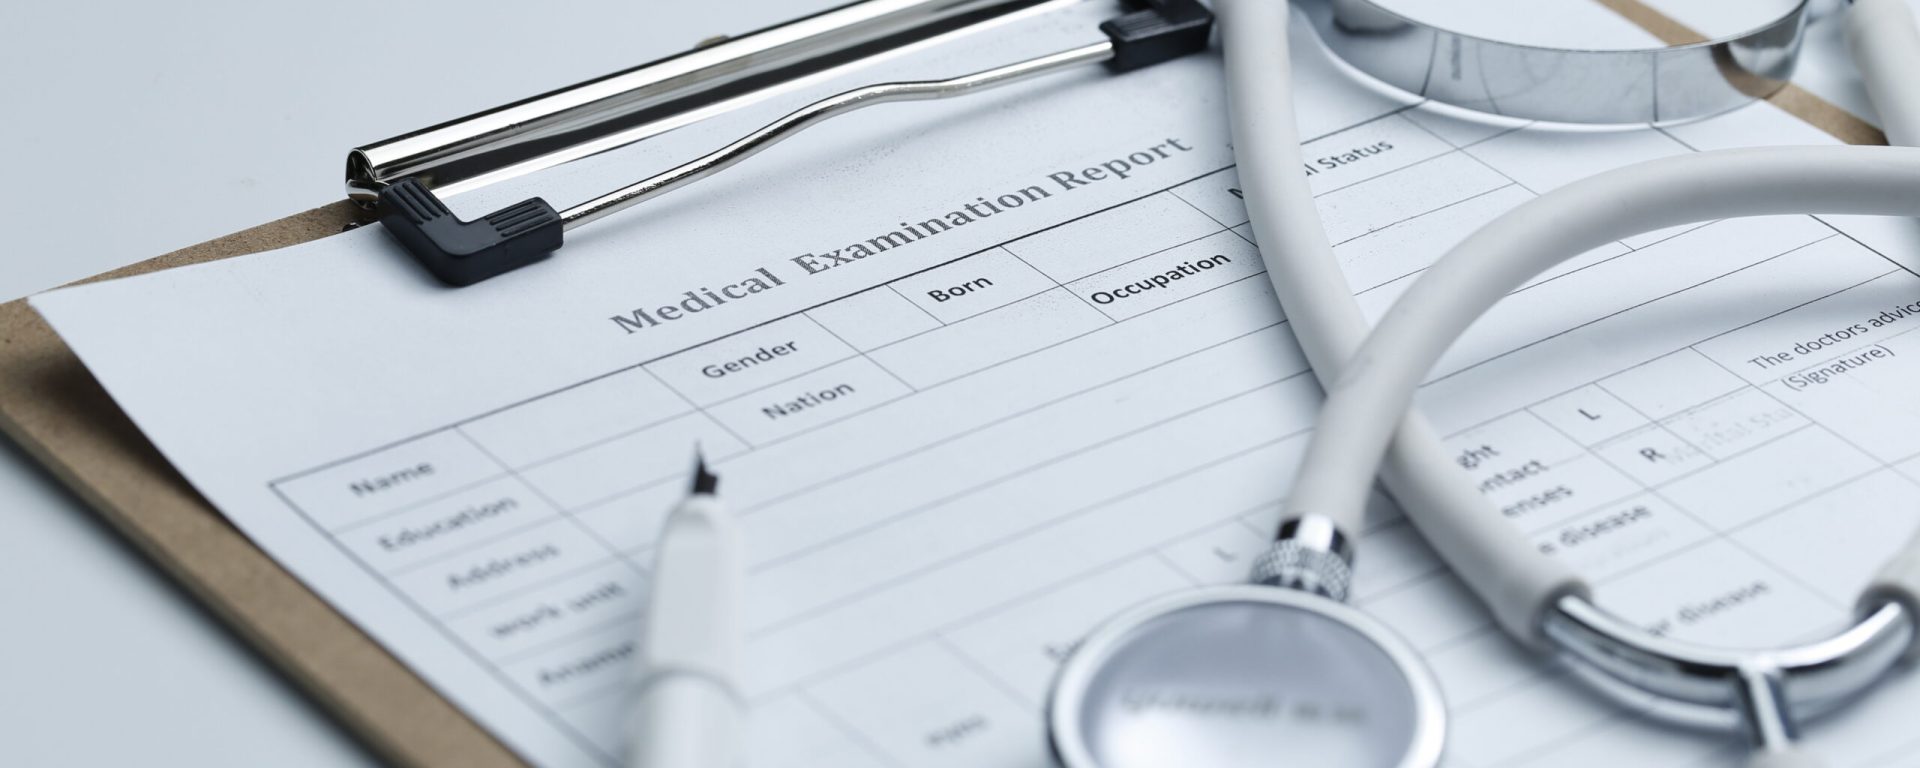 Medical examination report and stethoscope on white desktop